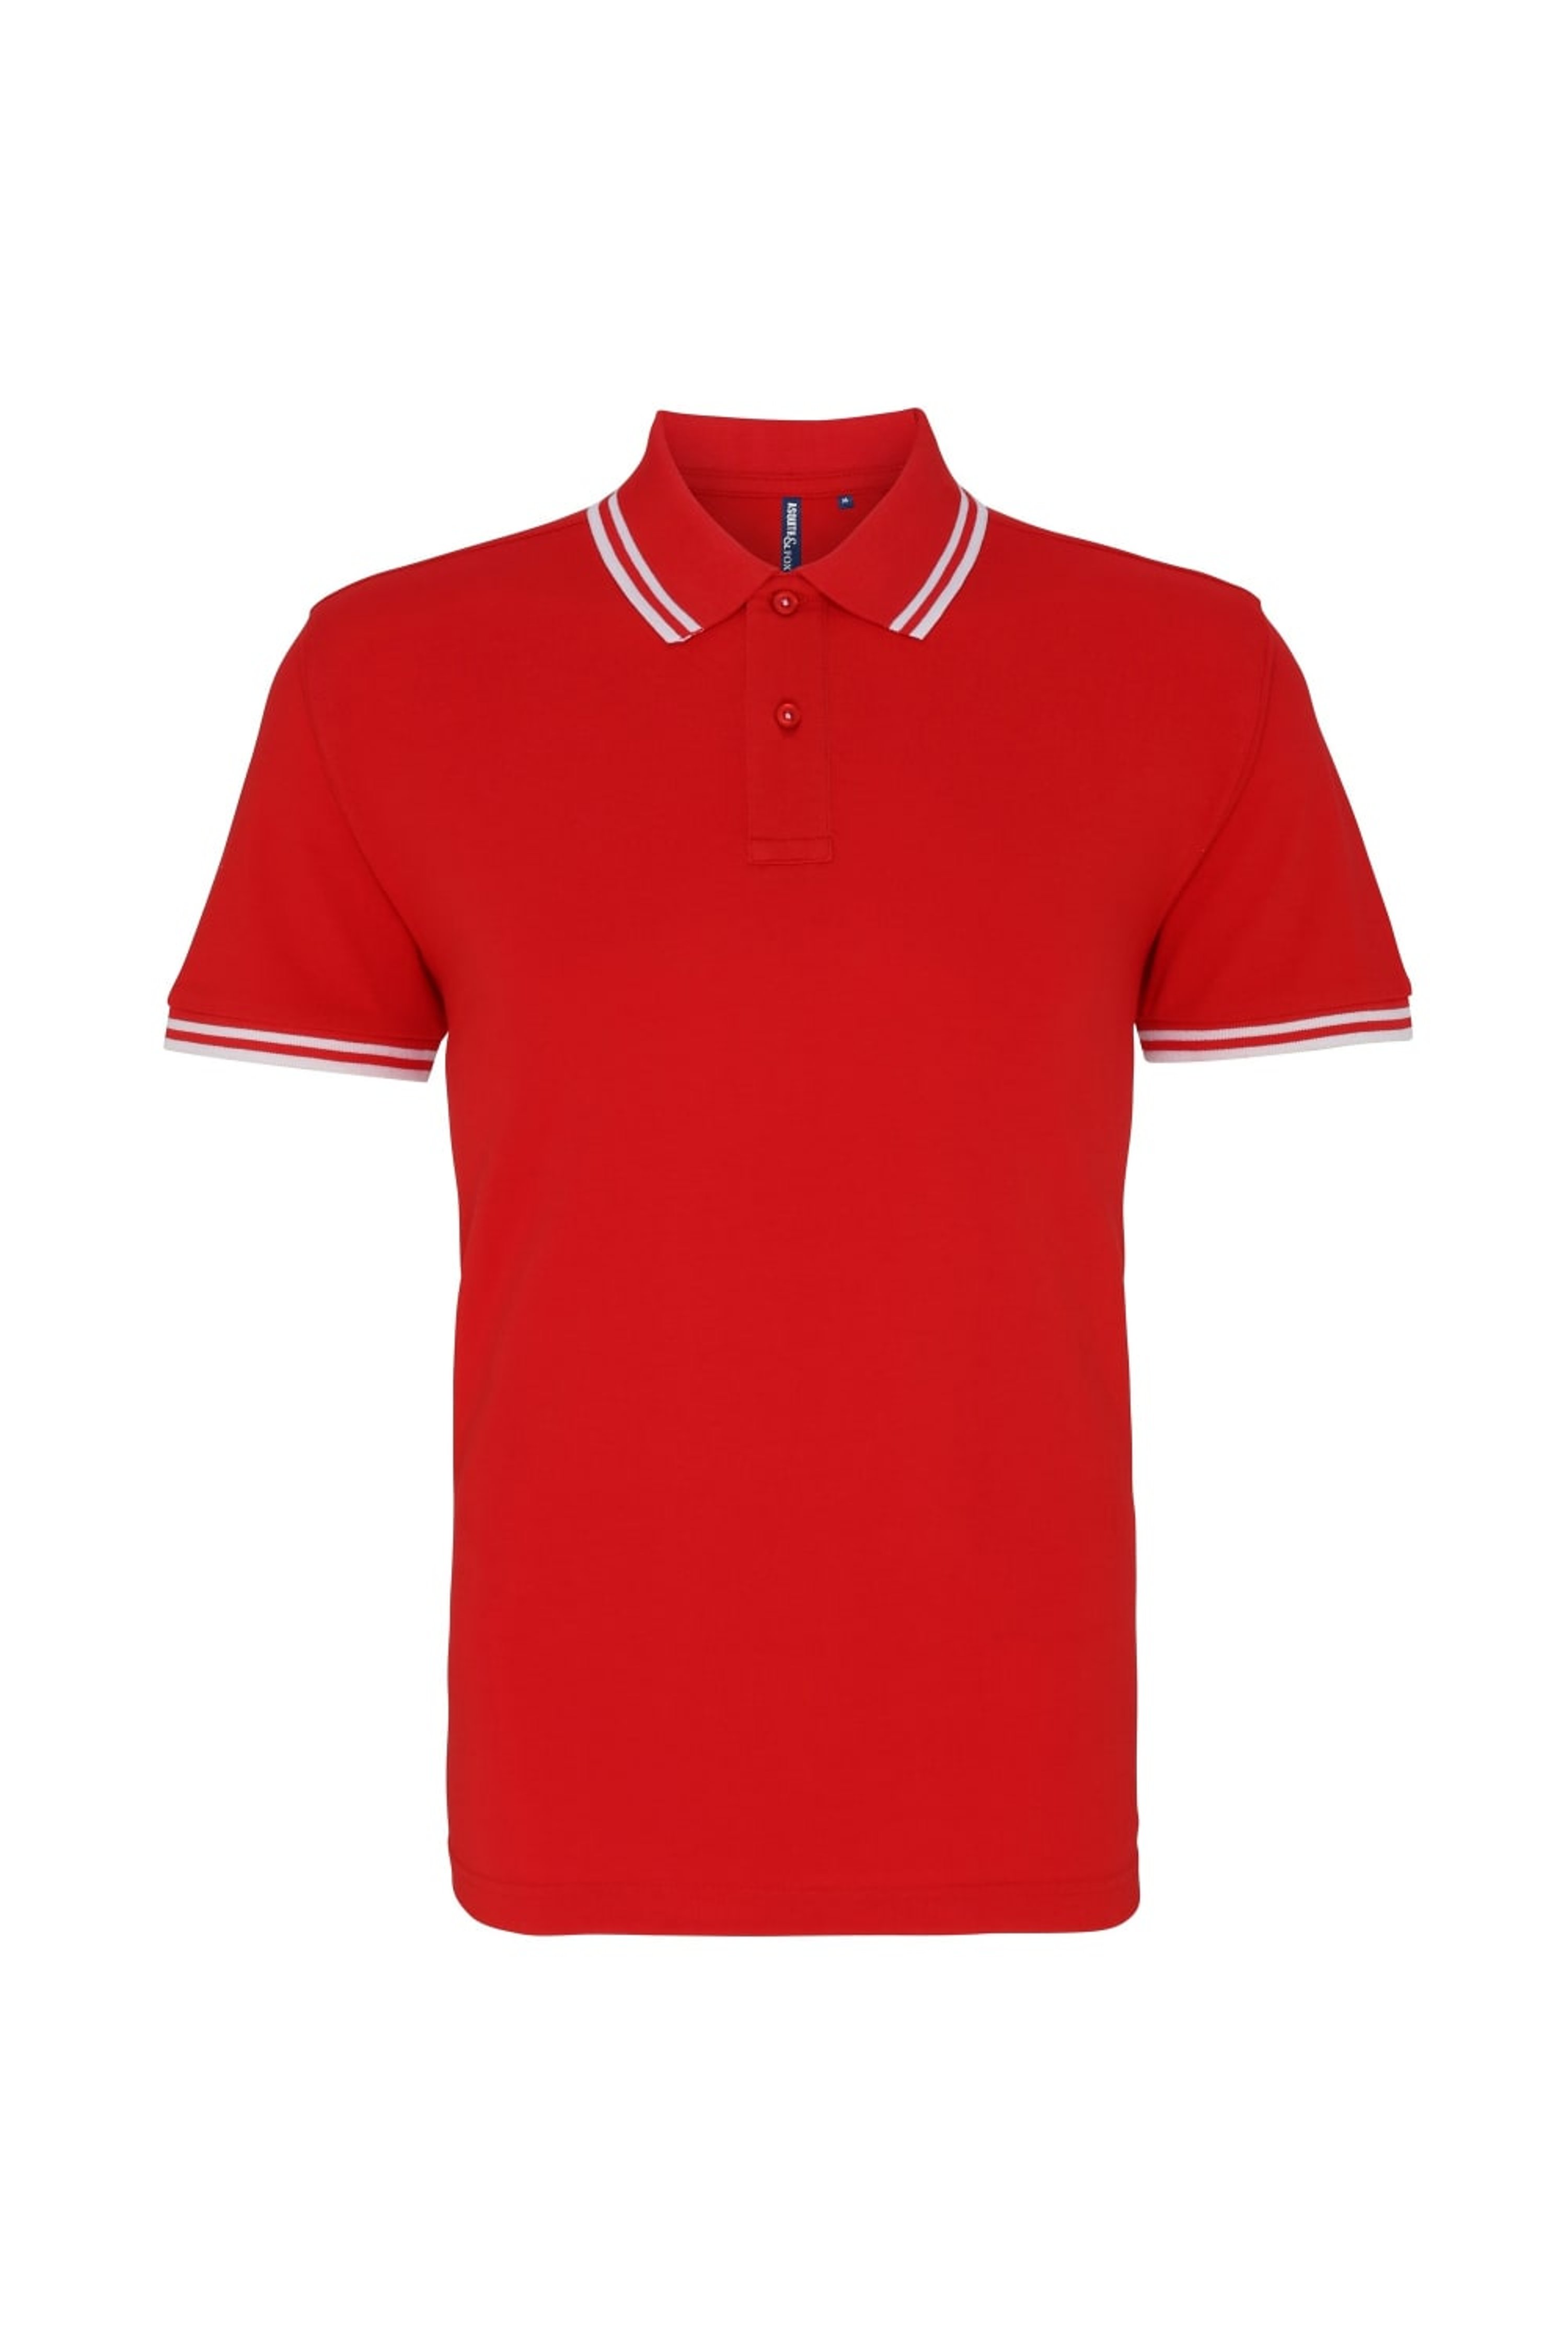 ASQUITH & FOX ASQUITH & FOX MENS CLASSIC FIT TIPPED POLO SHIRT